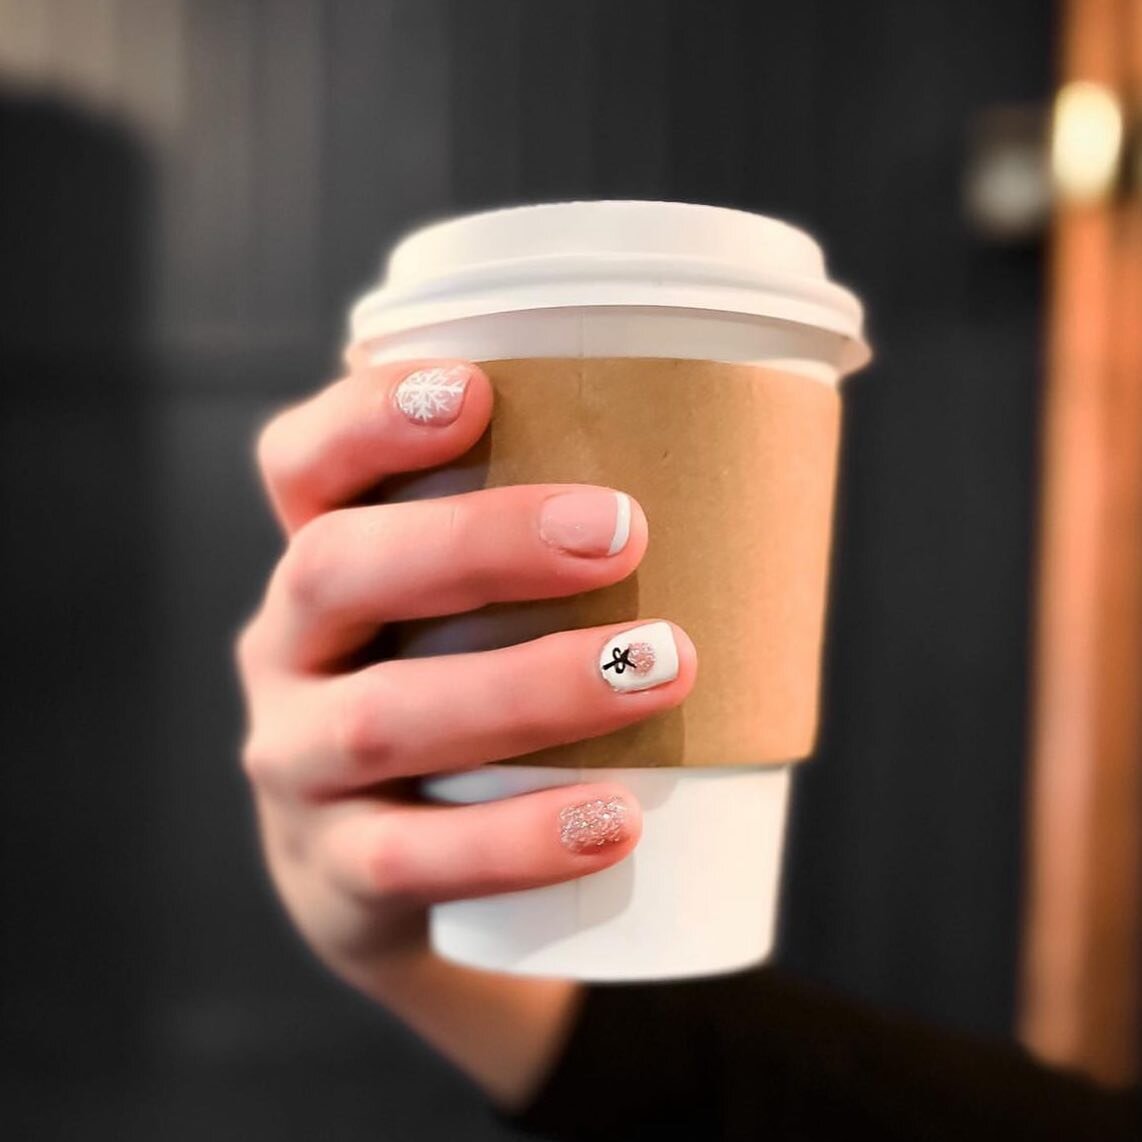 Are you holiday ready? Need ways to feel festive? Grab a holiday drink from @maplemooncoffeecompany &amp; a holiday themed manicure from @bbm_lounge to get into the season 🎄🤩